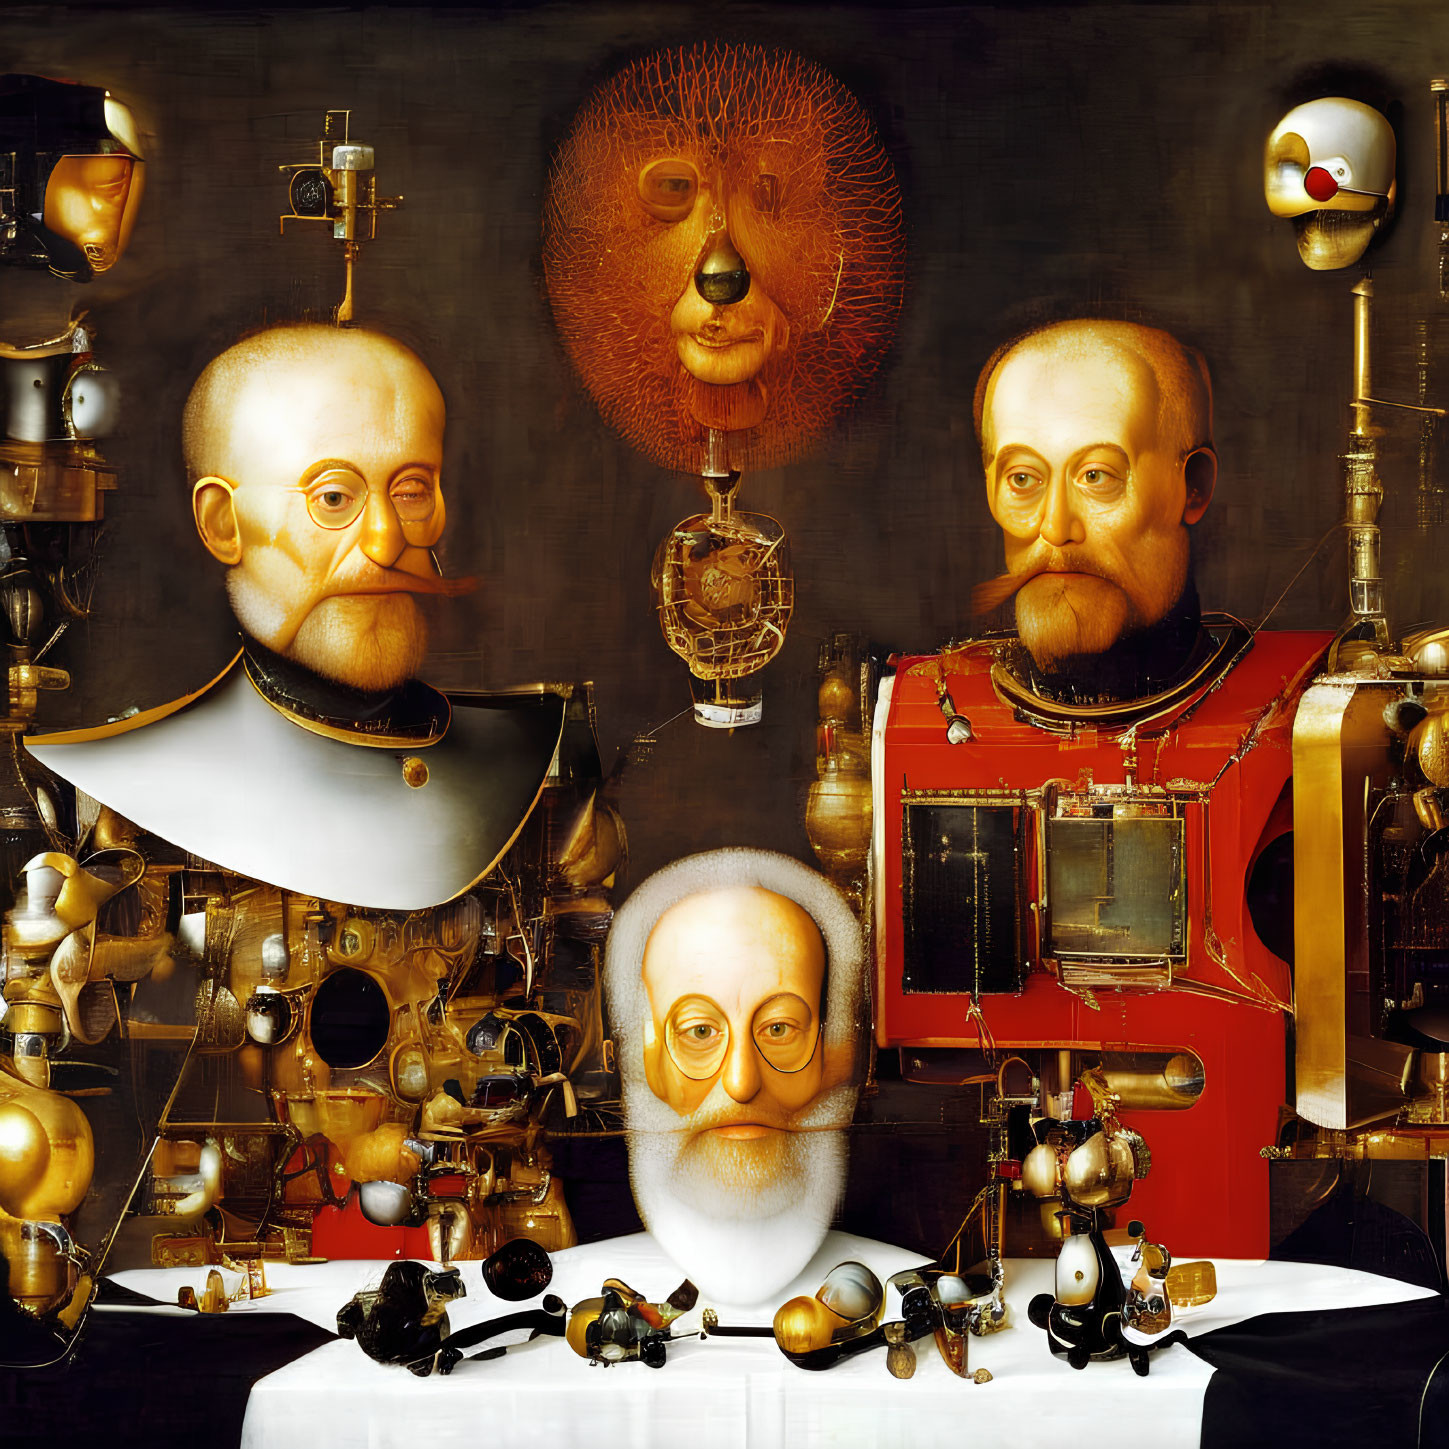 Surreal Artwork: Three Men with Mechanical Bodies in Intricate Setting